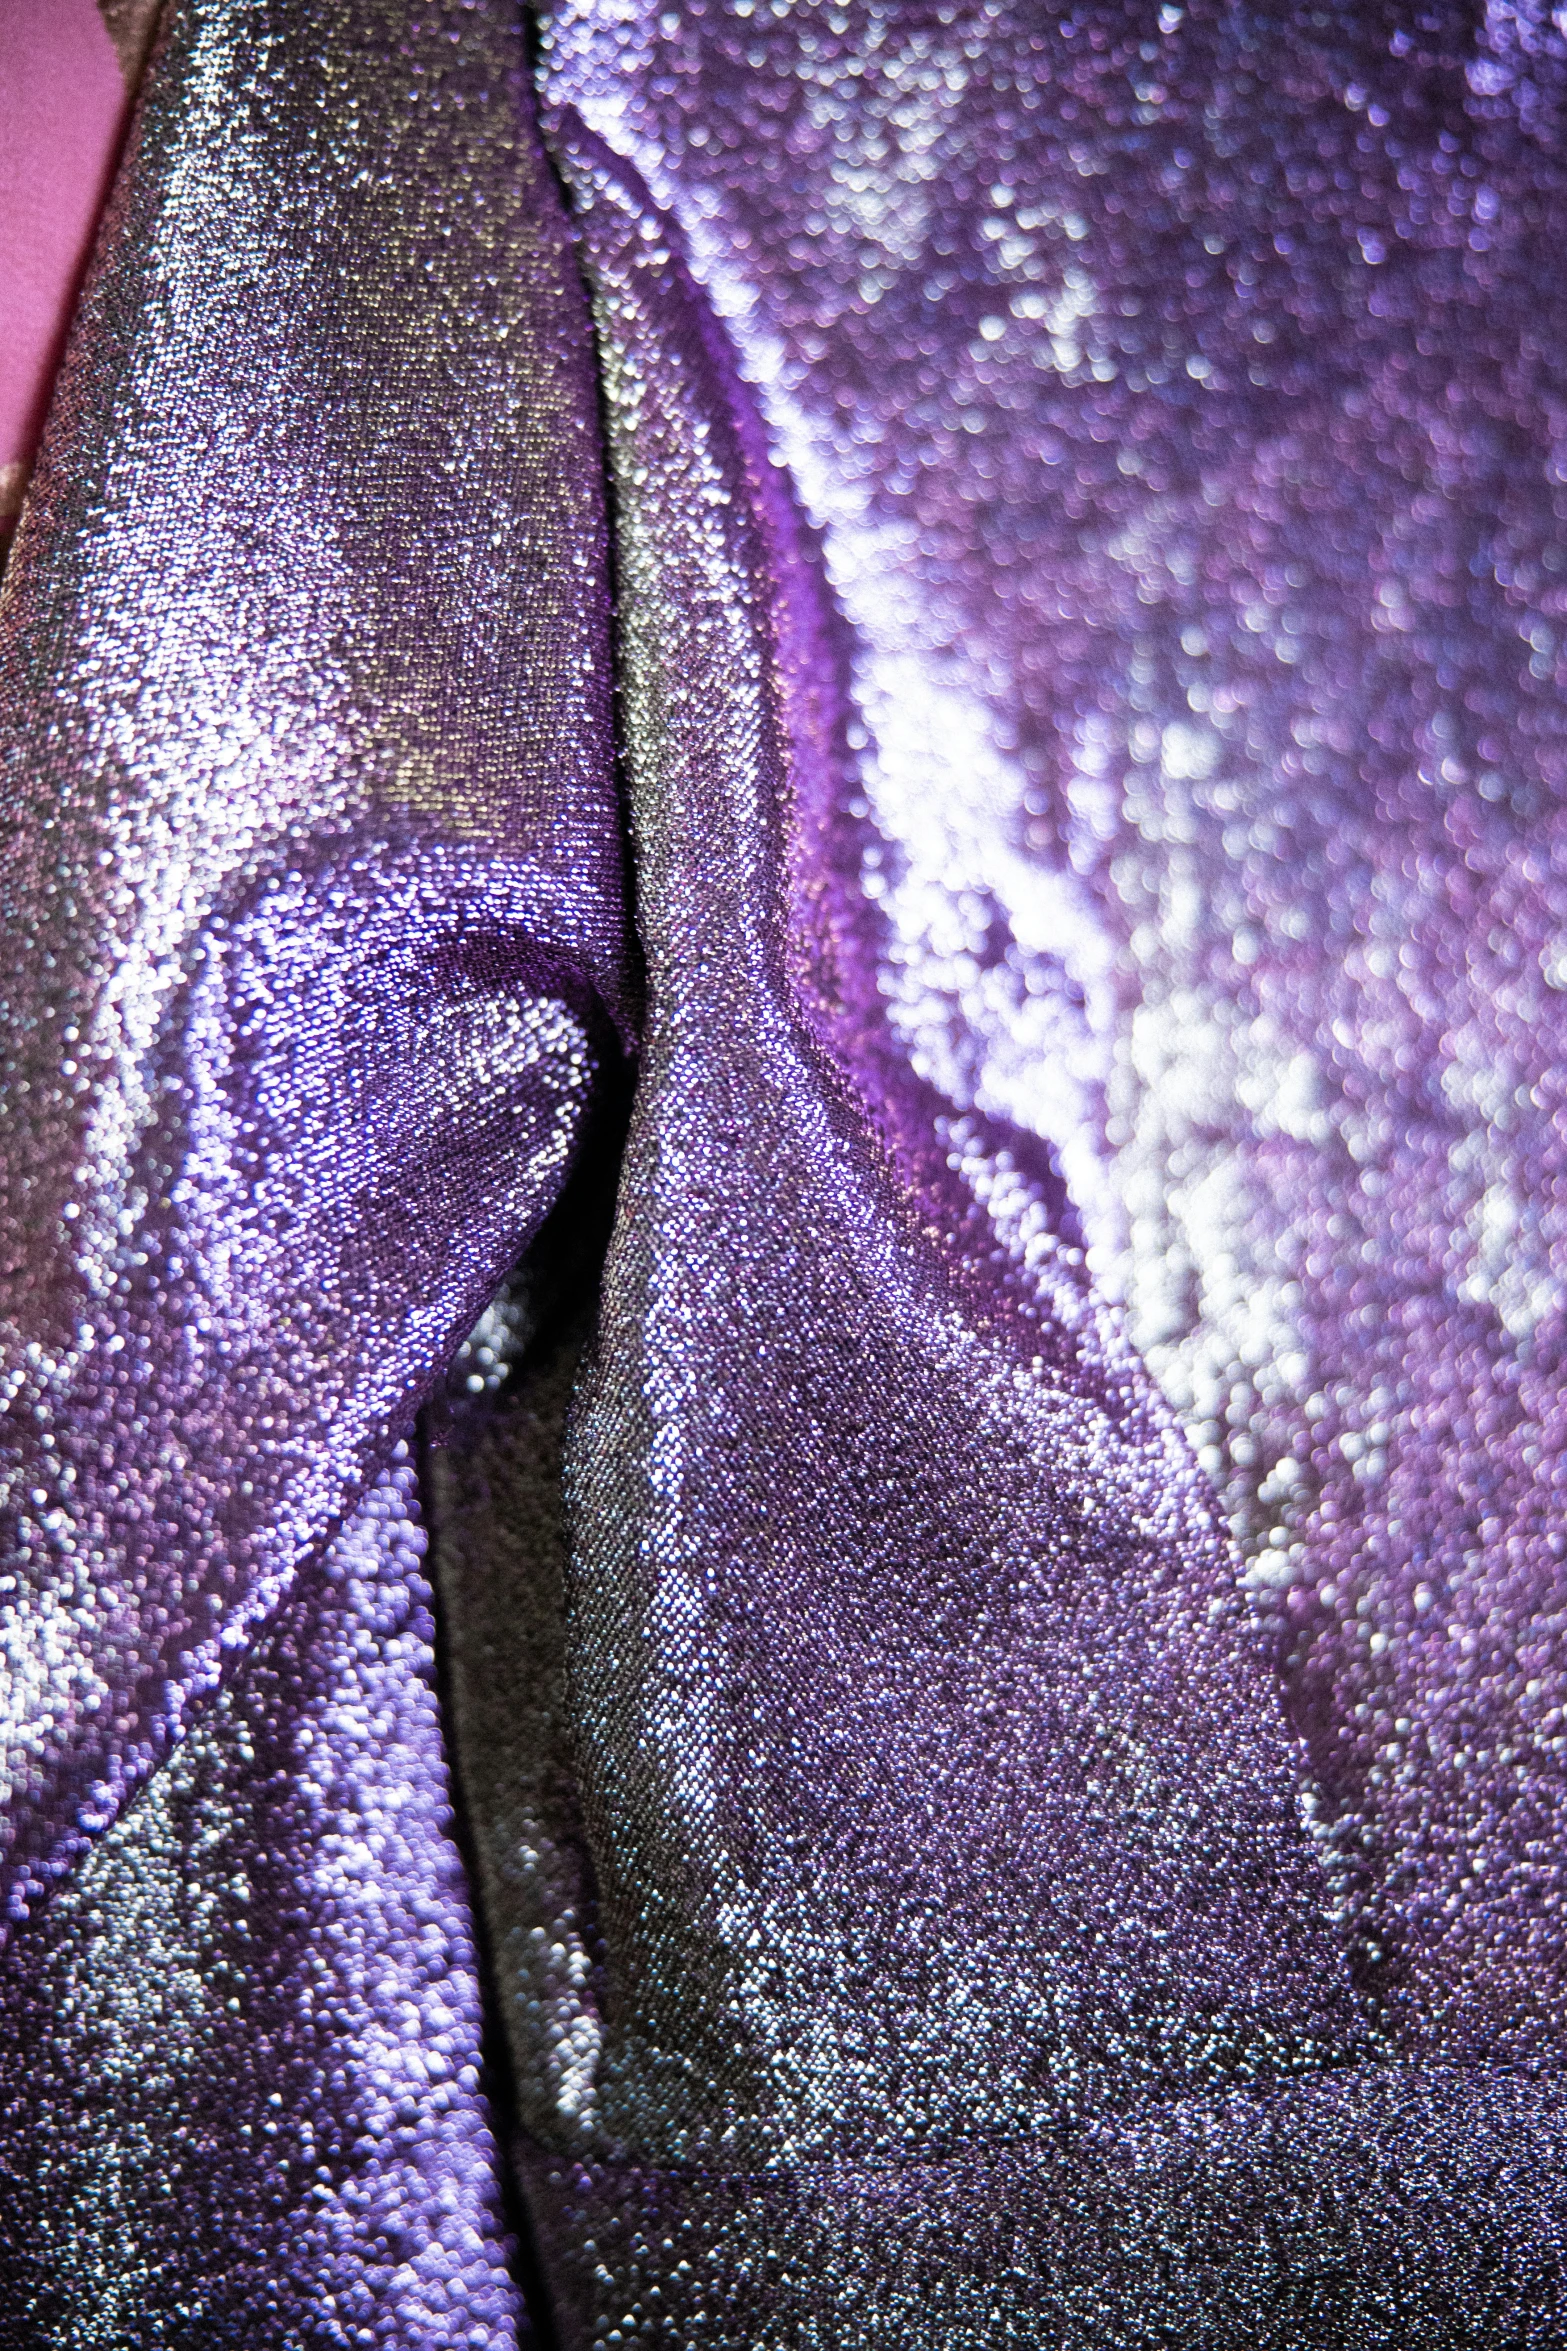 a purple colored fabric with small and dark designs